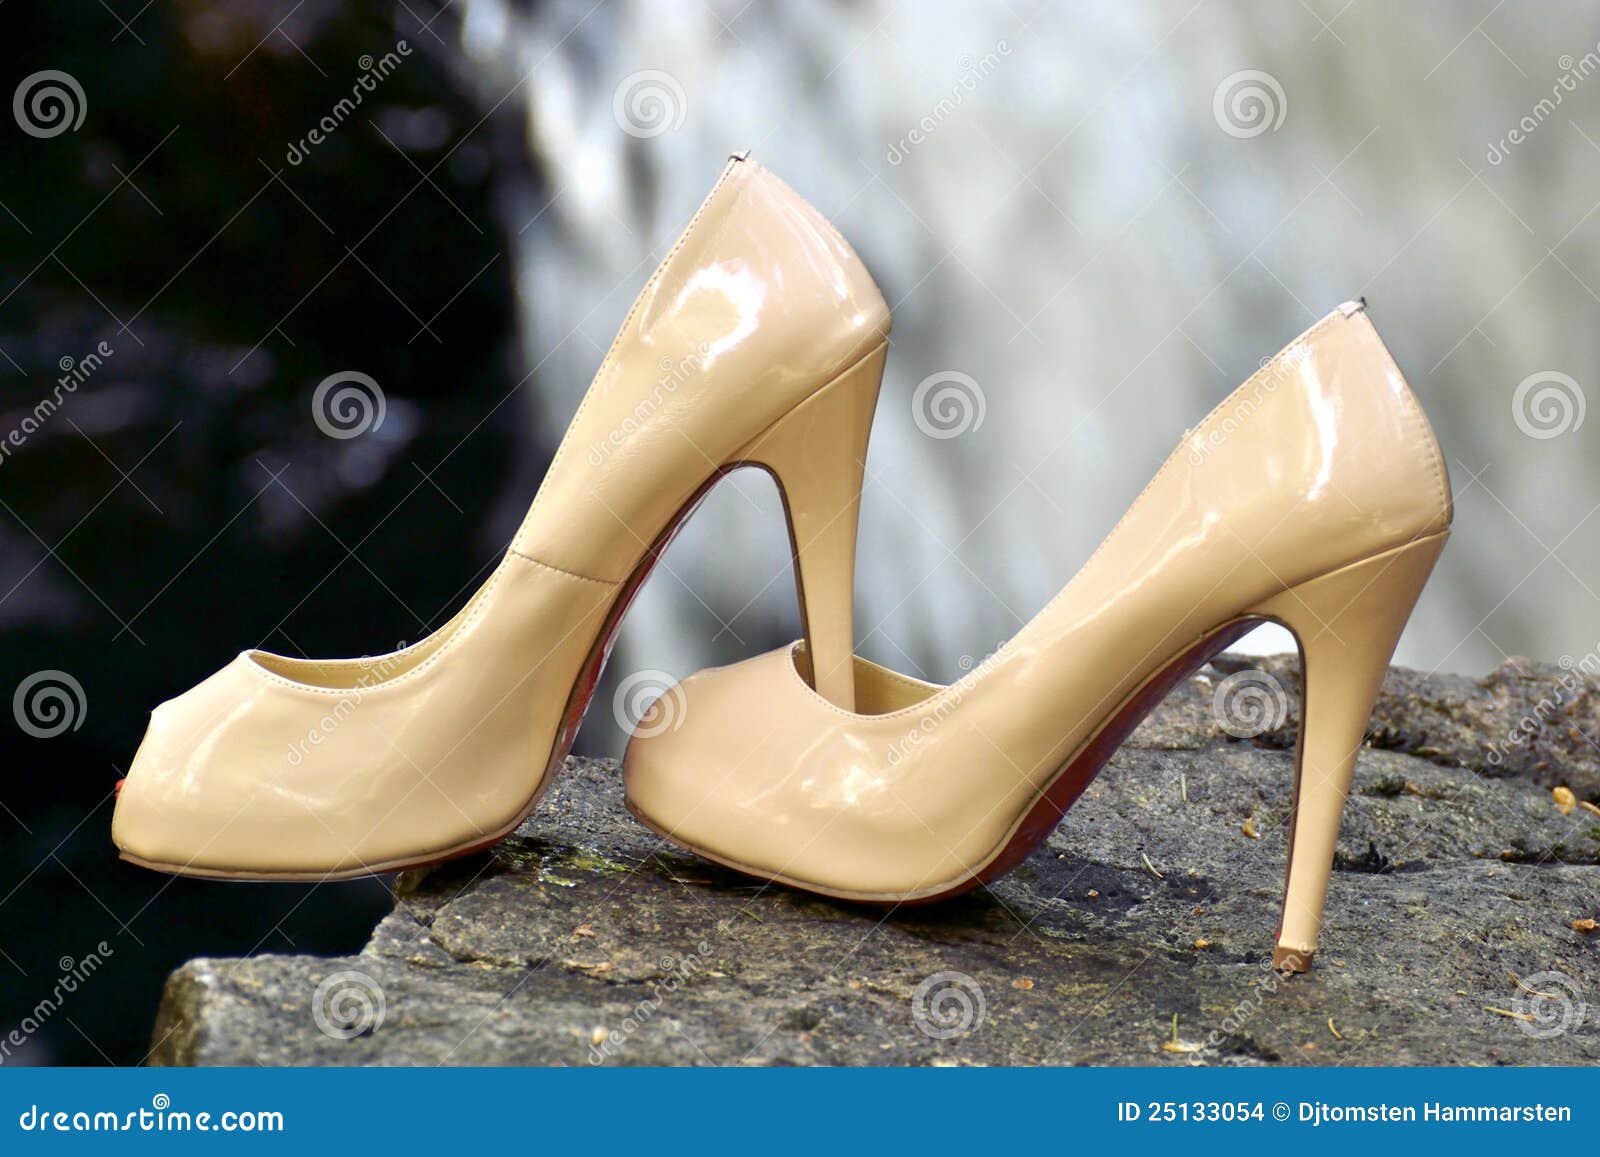 Shoes a pair of pumps stock Image shoe, leather 25133054